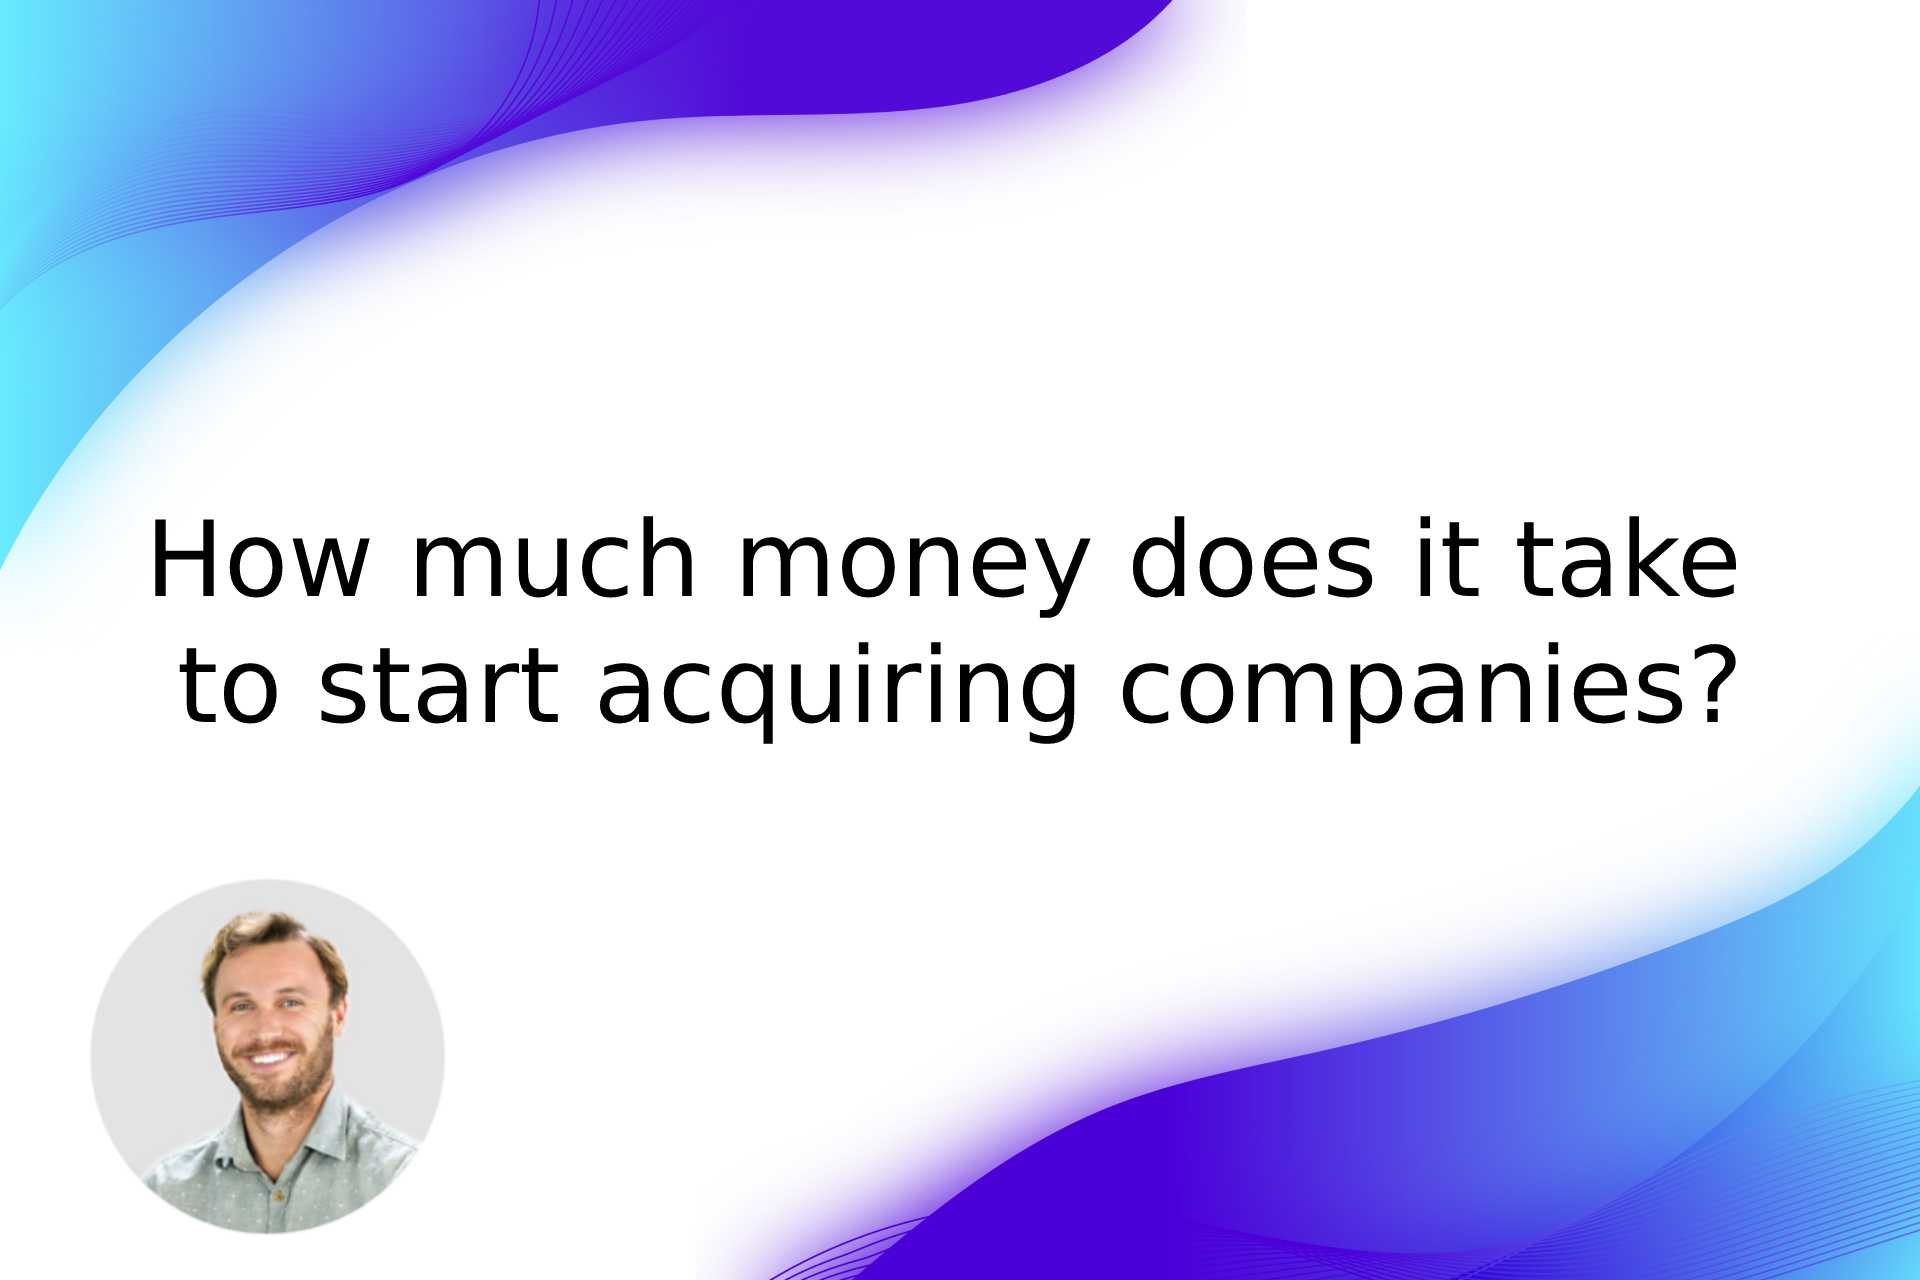 How much money does it take to start acquiring companies?